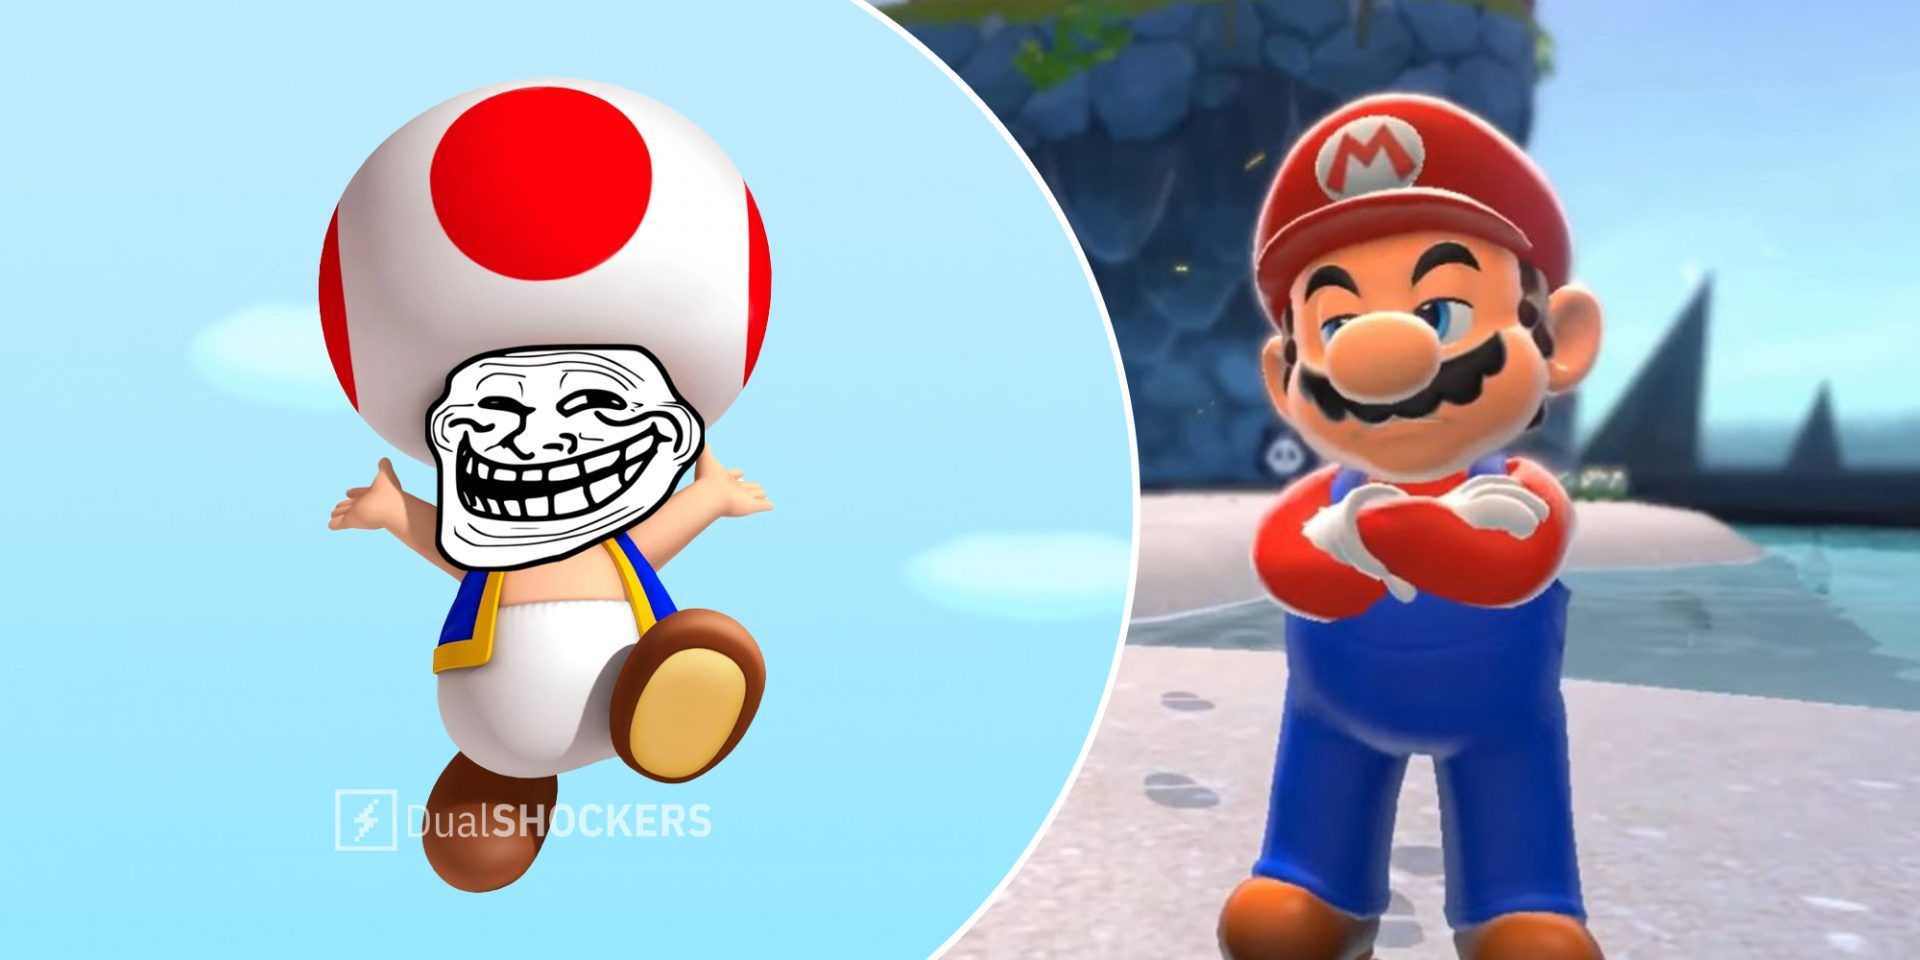 Toad with troll face on left, unimpressed Mario on right